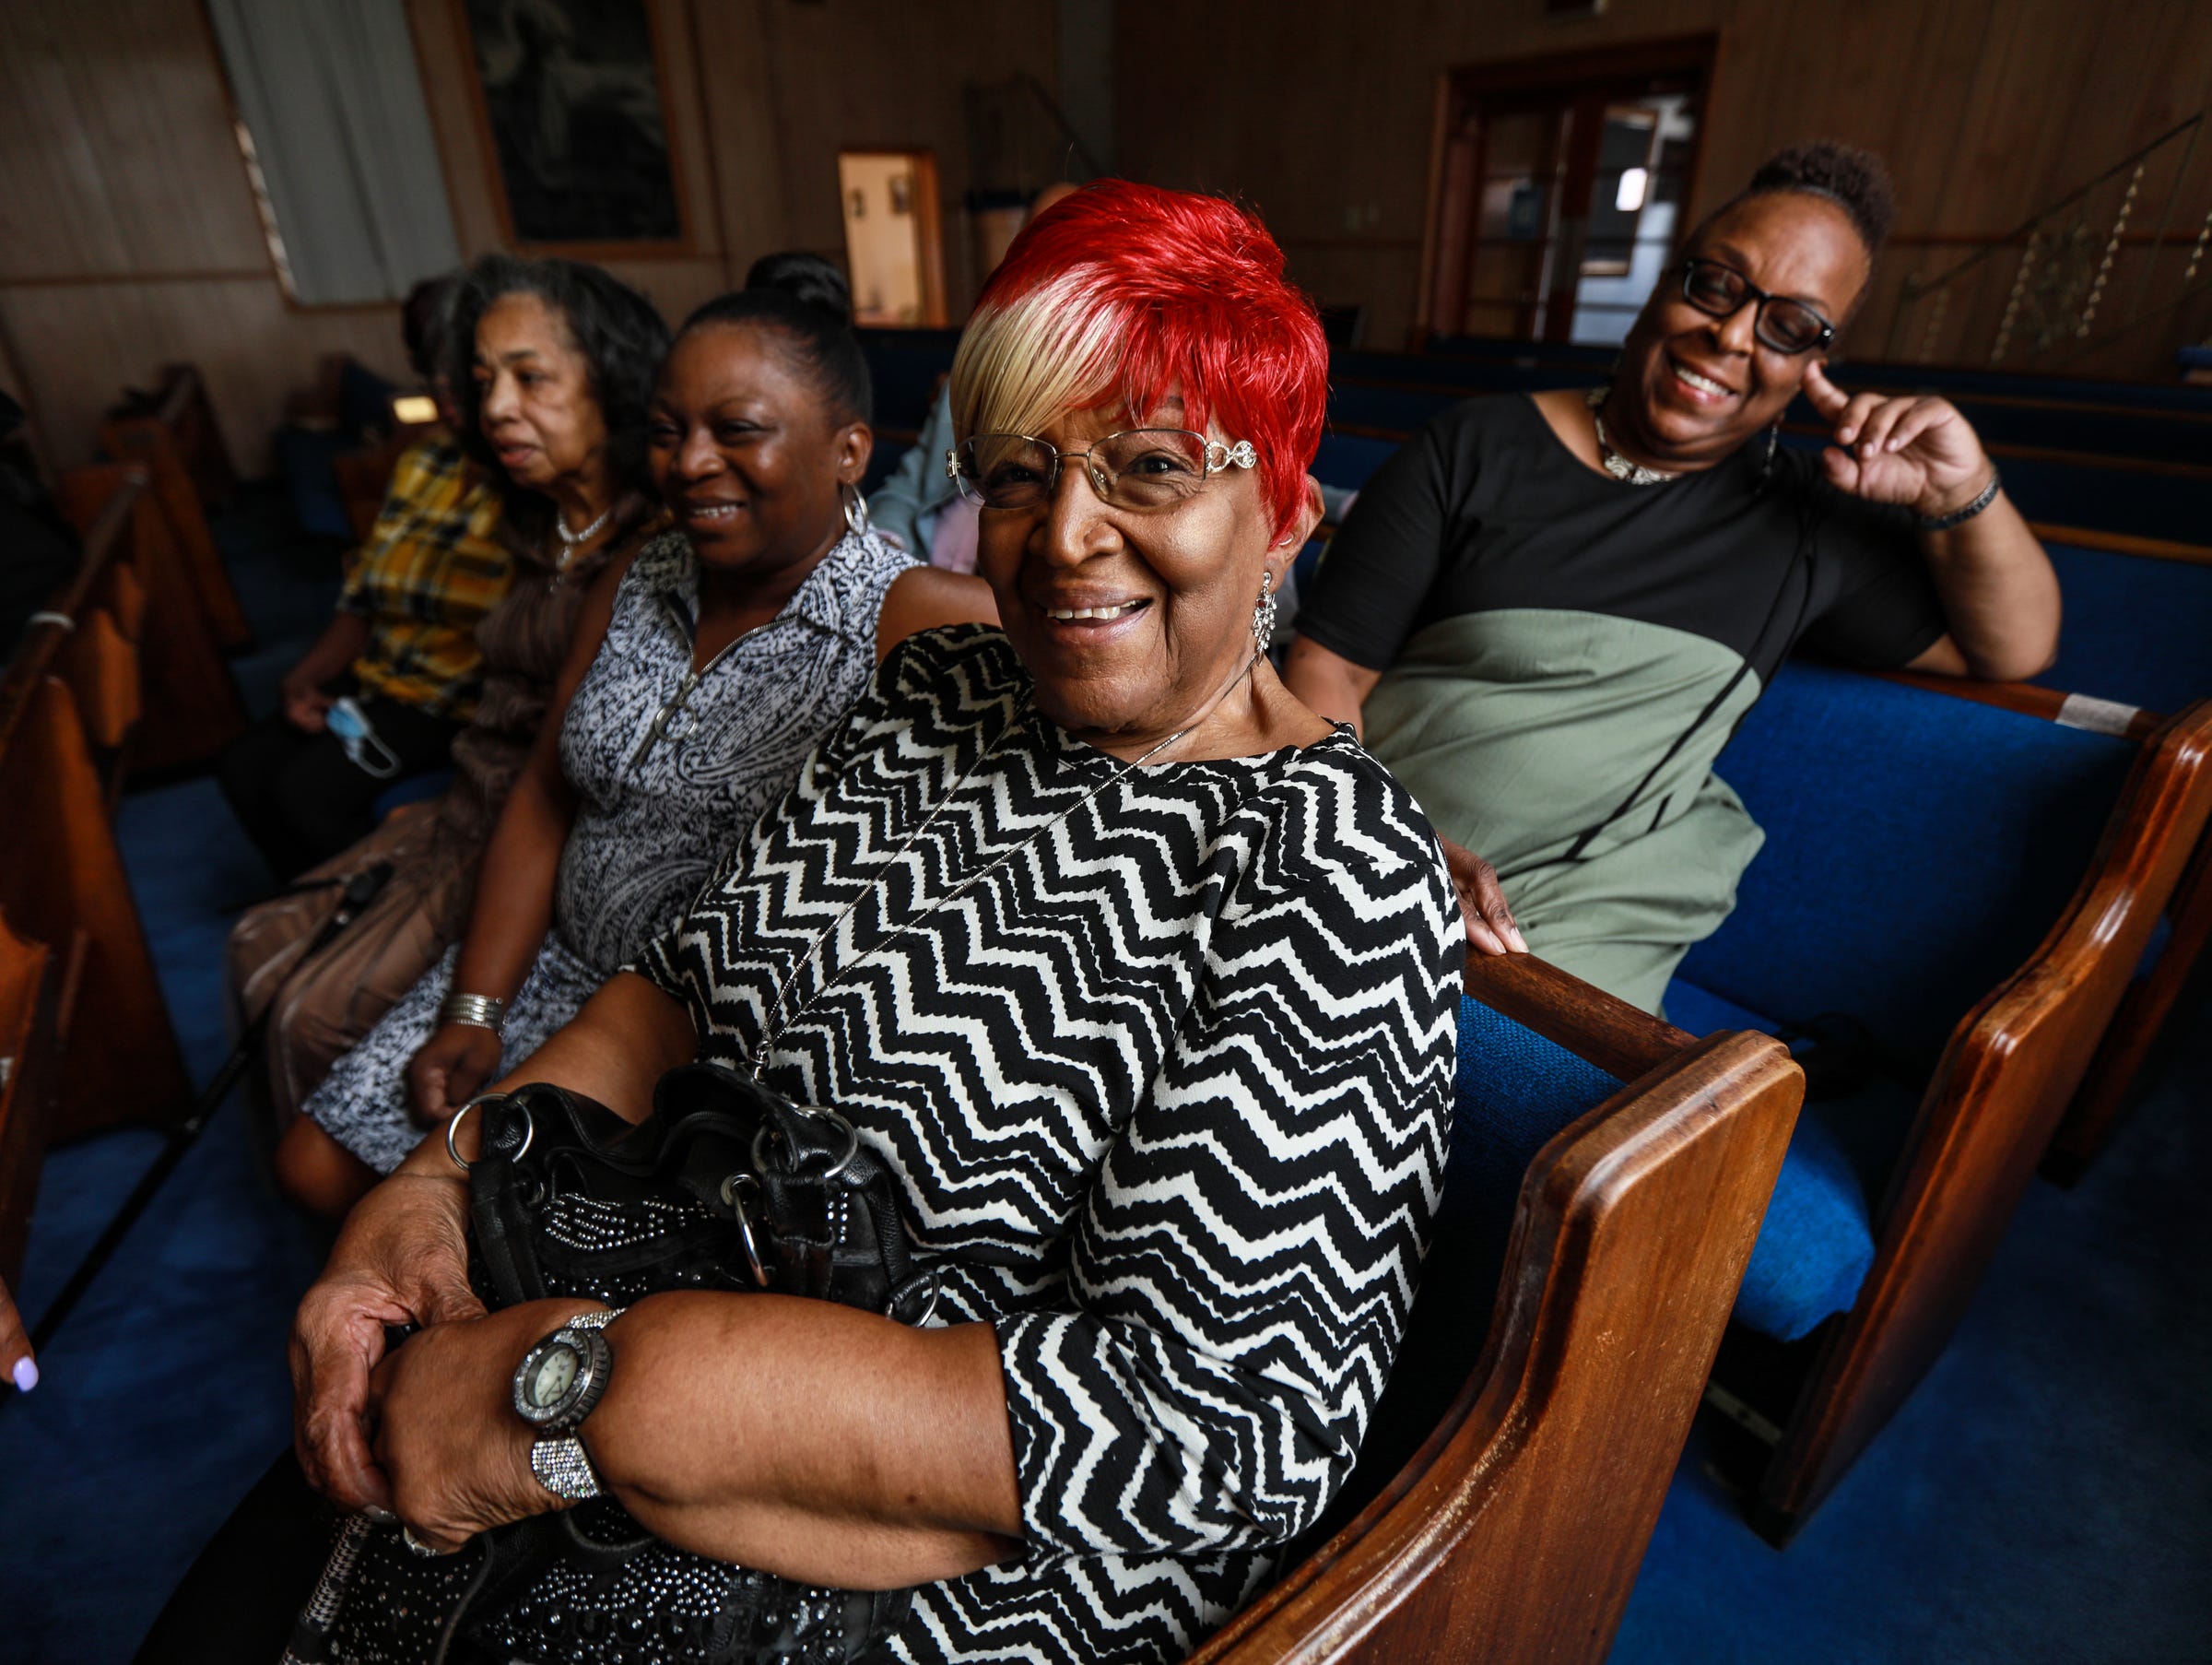 Bessie Stallworth, 90, of Detroit center row on the right, has been a member of the Northend Church of God and Christ since she moved to Detroit in 1950, during the second wave of the Great Migration from the south and has been committed to the church as much as she has been to Detroit and the family she raised in Detroit.